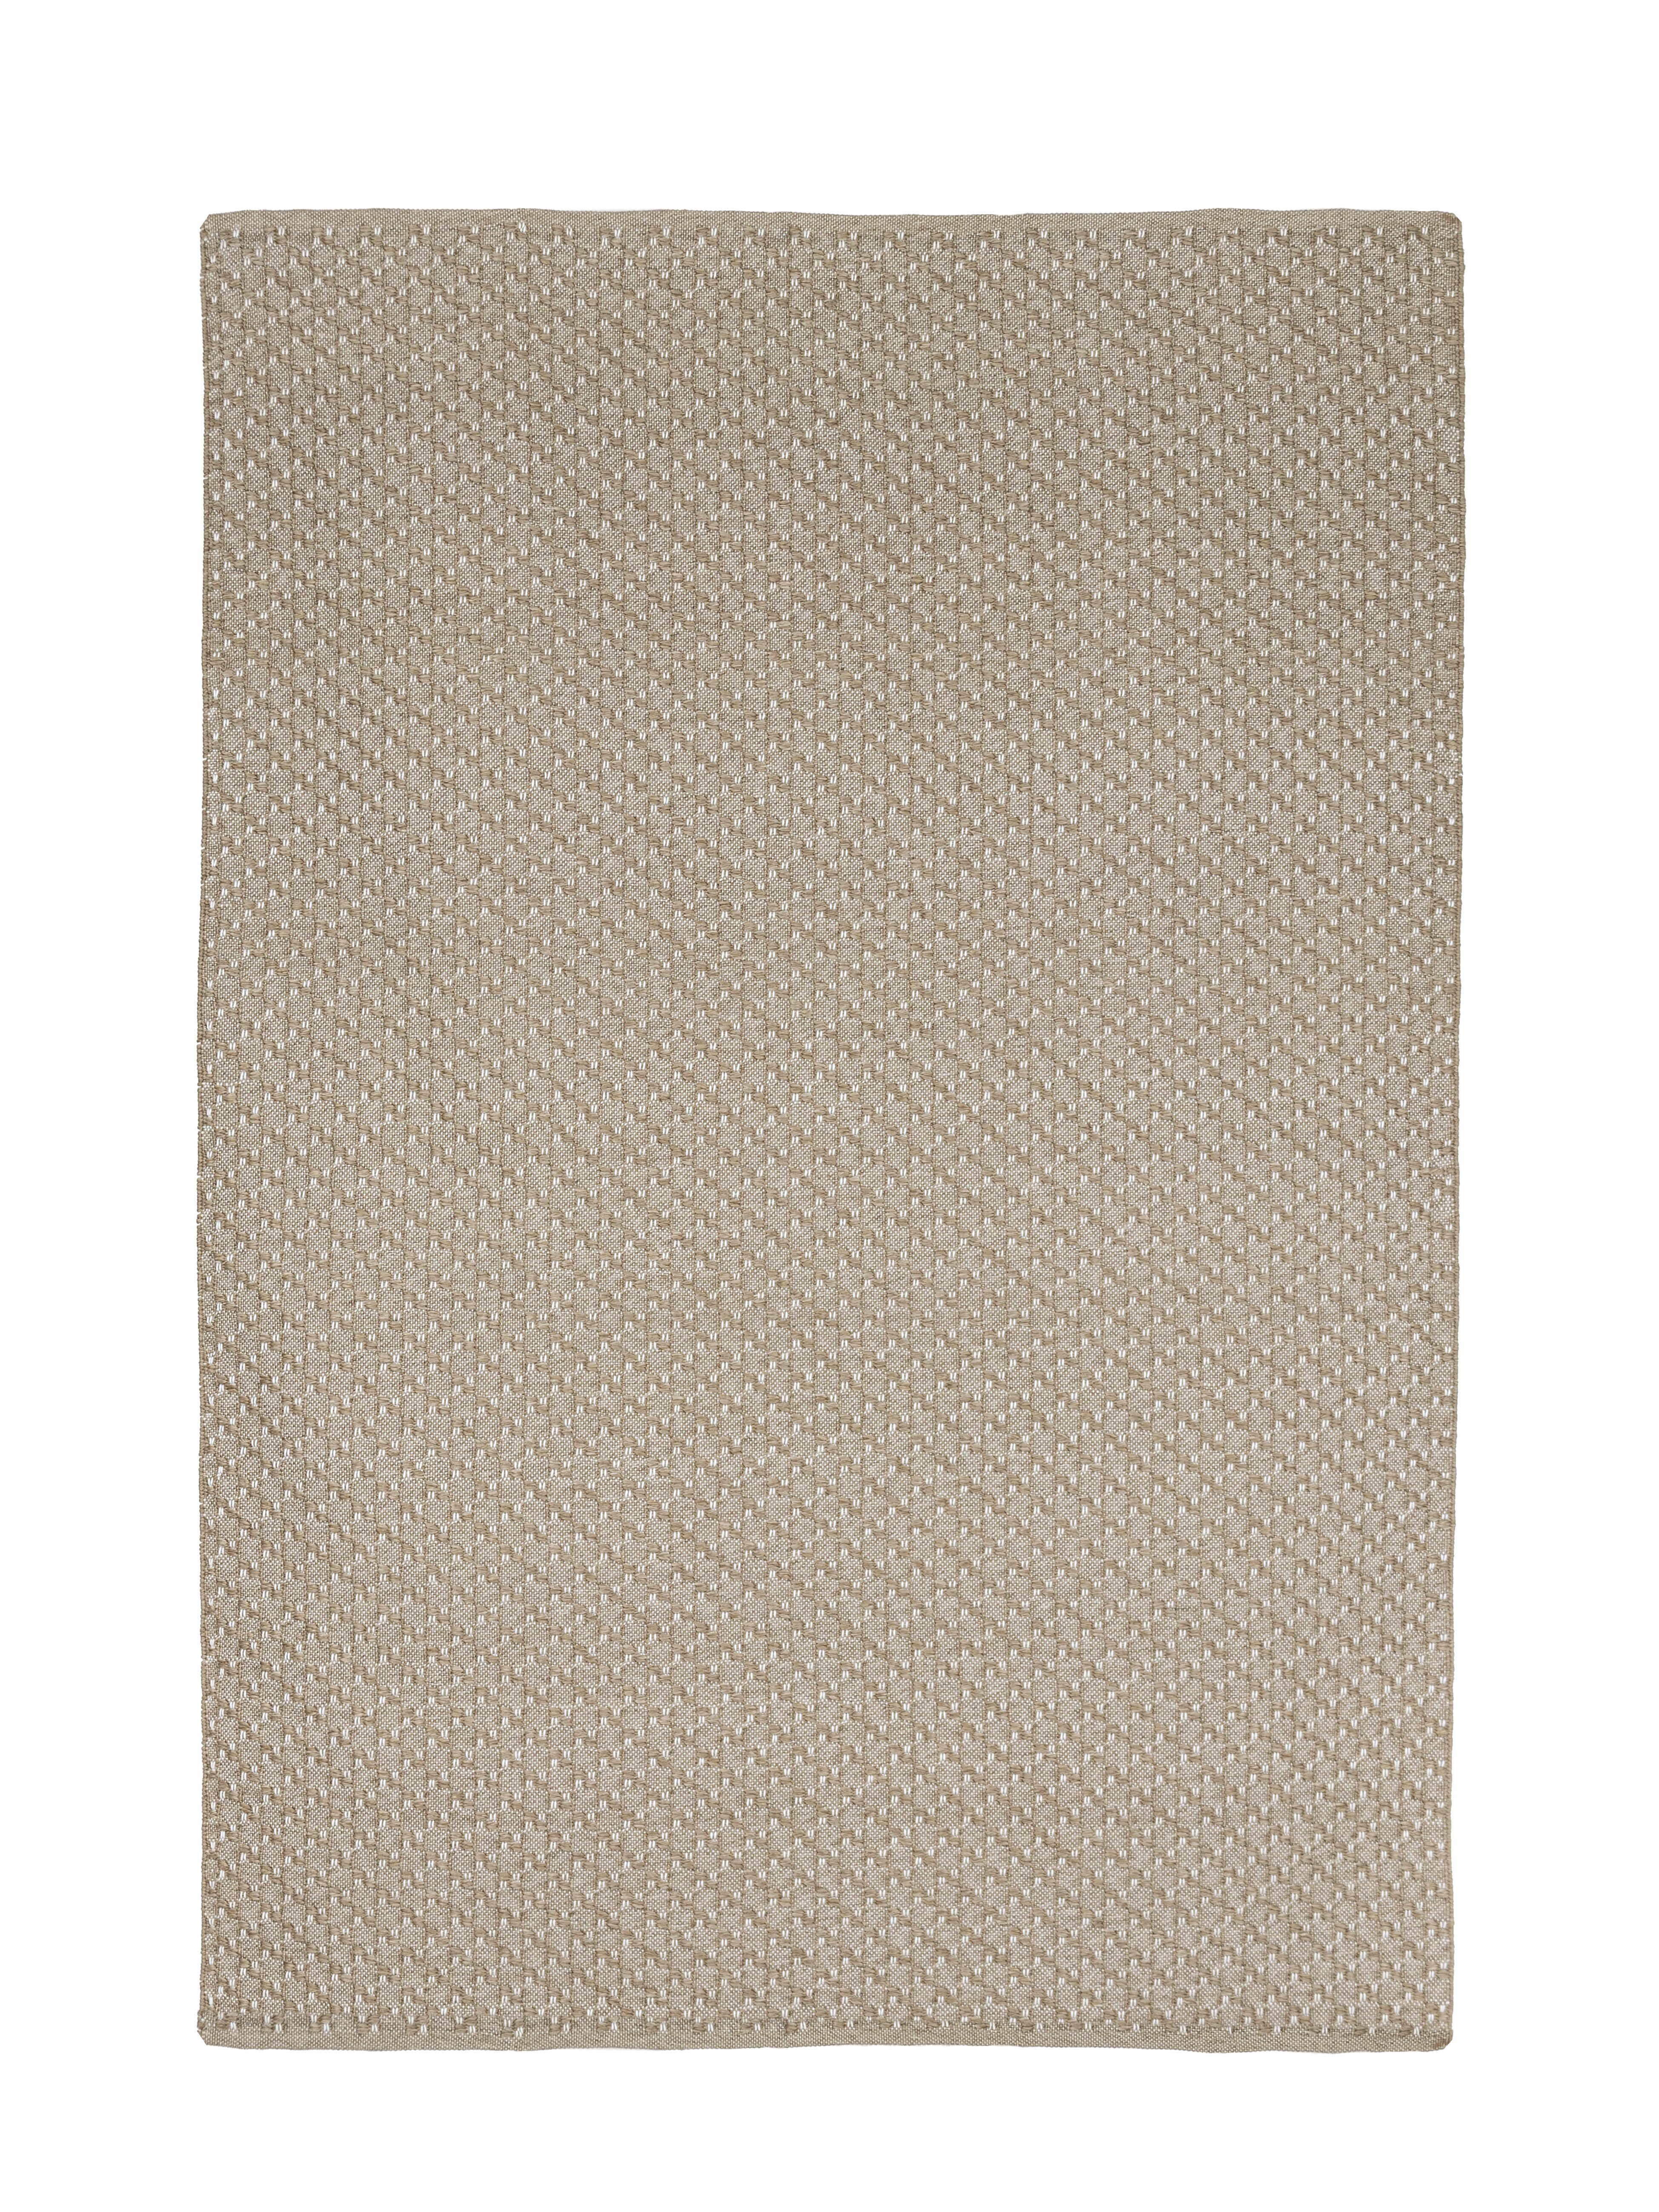 Outdoor-Teppich Bhajan Taupe 170x240